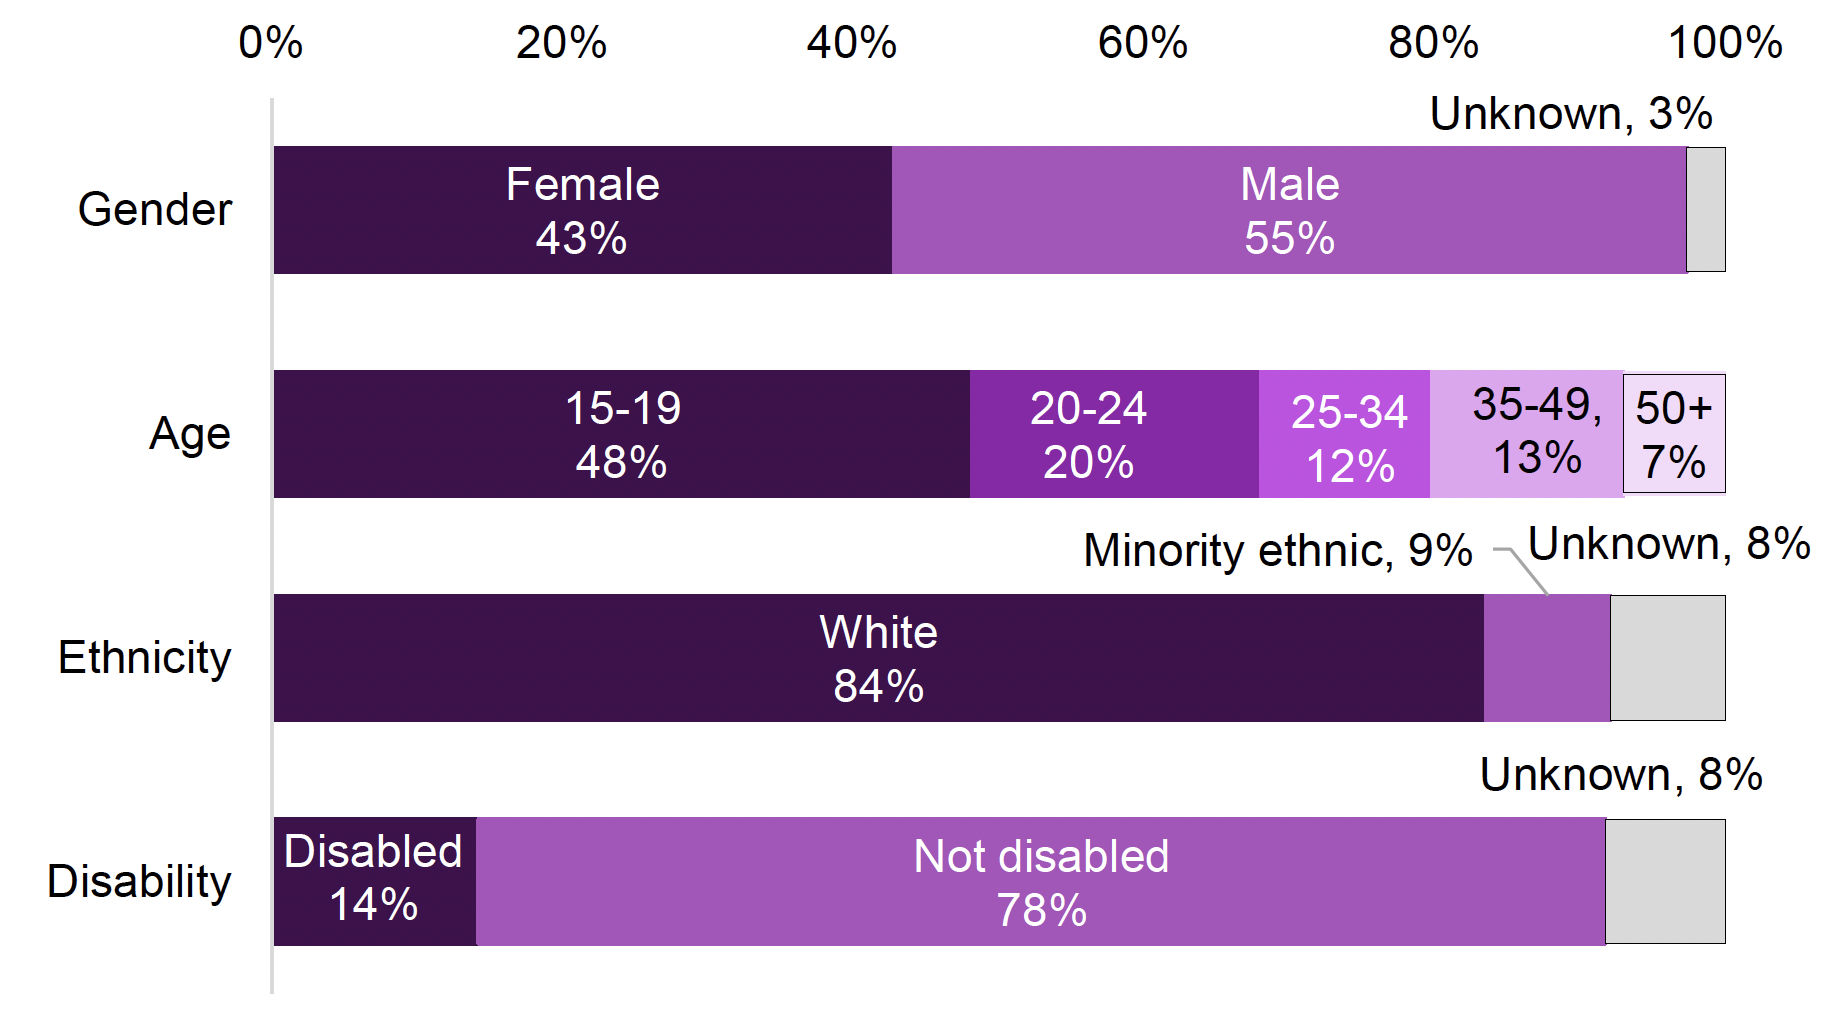 More men, young and white people, and non-disabled people have been supported through NOLB